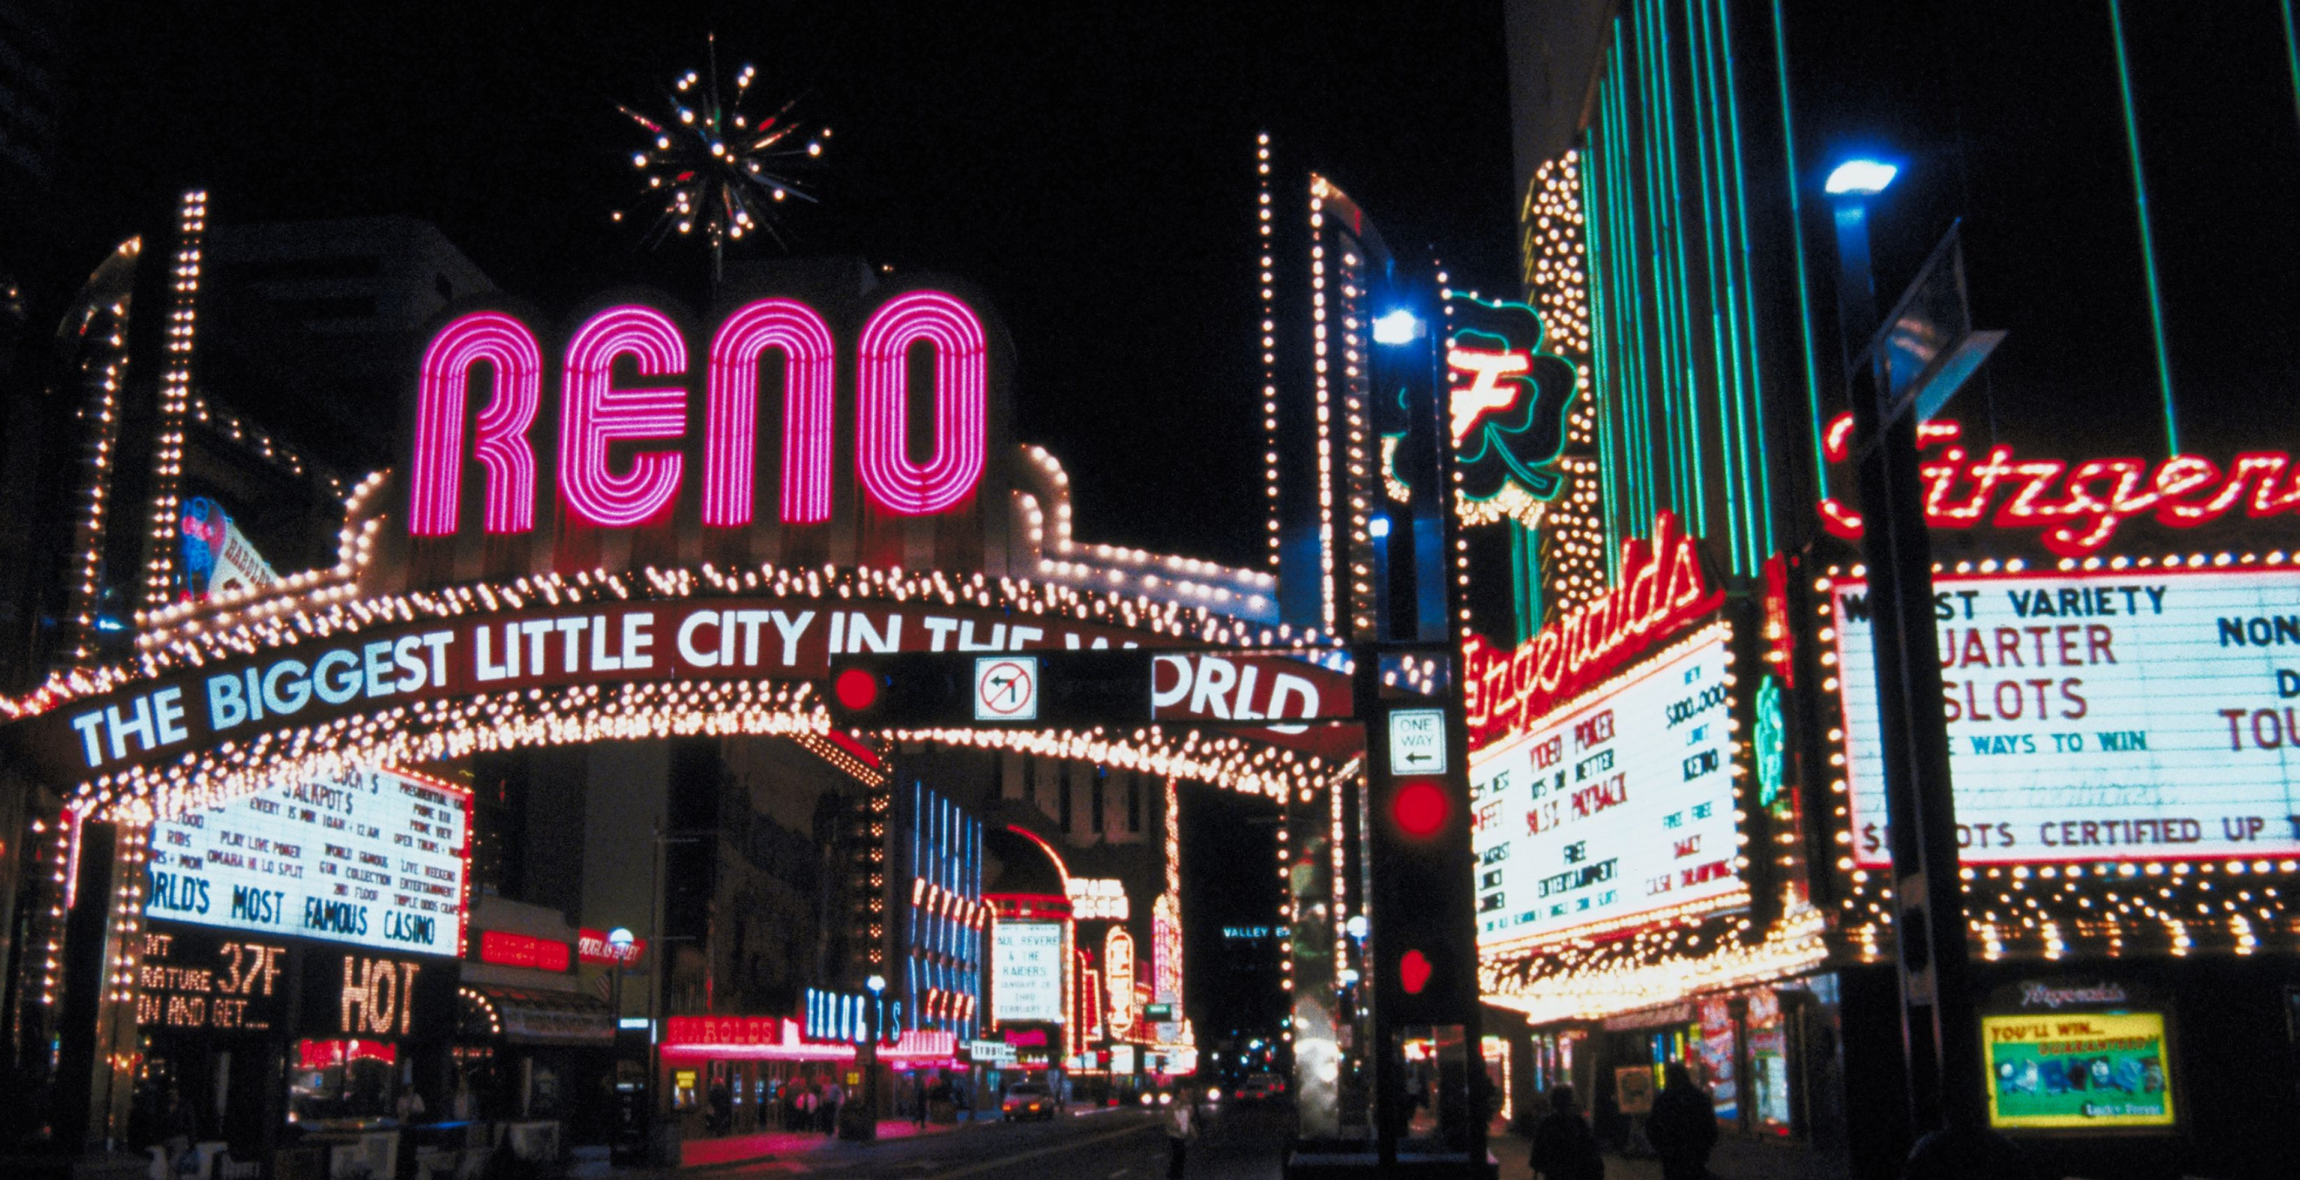 the city of Reno is lit up with signs at nighttime